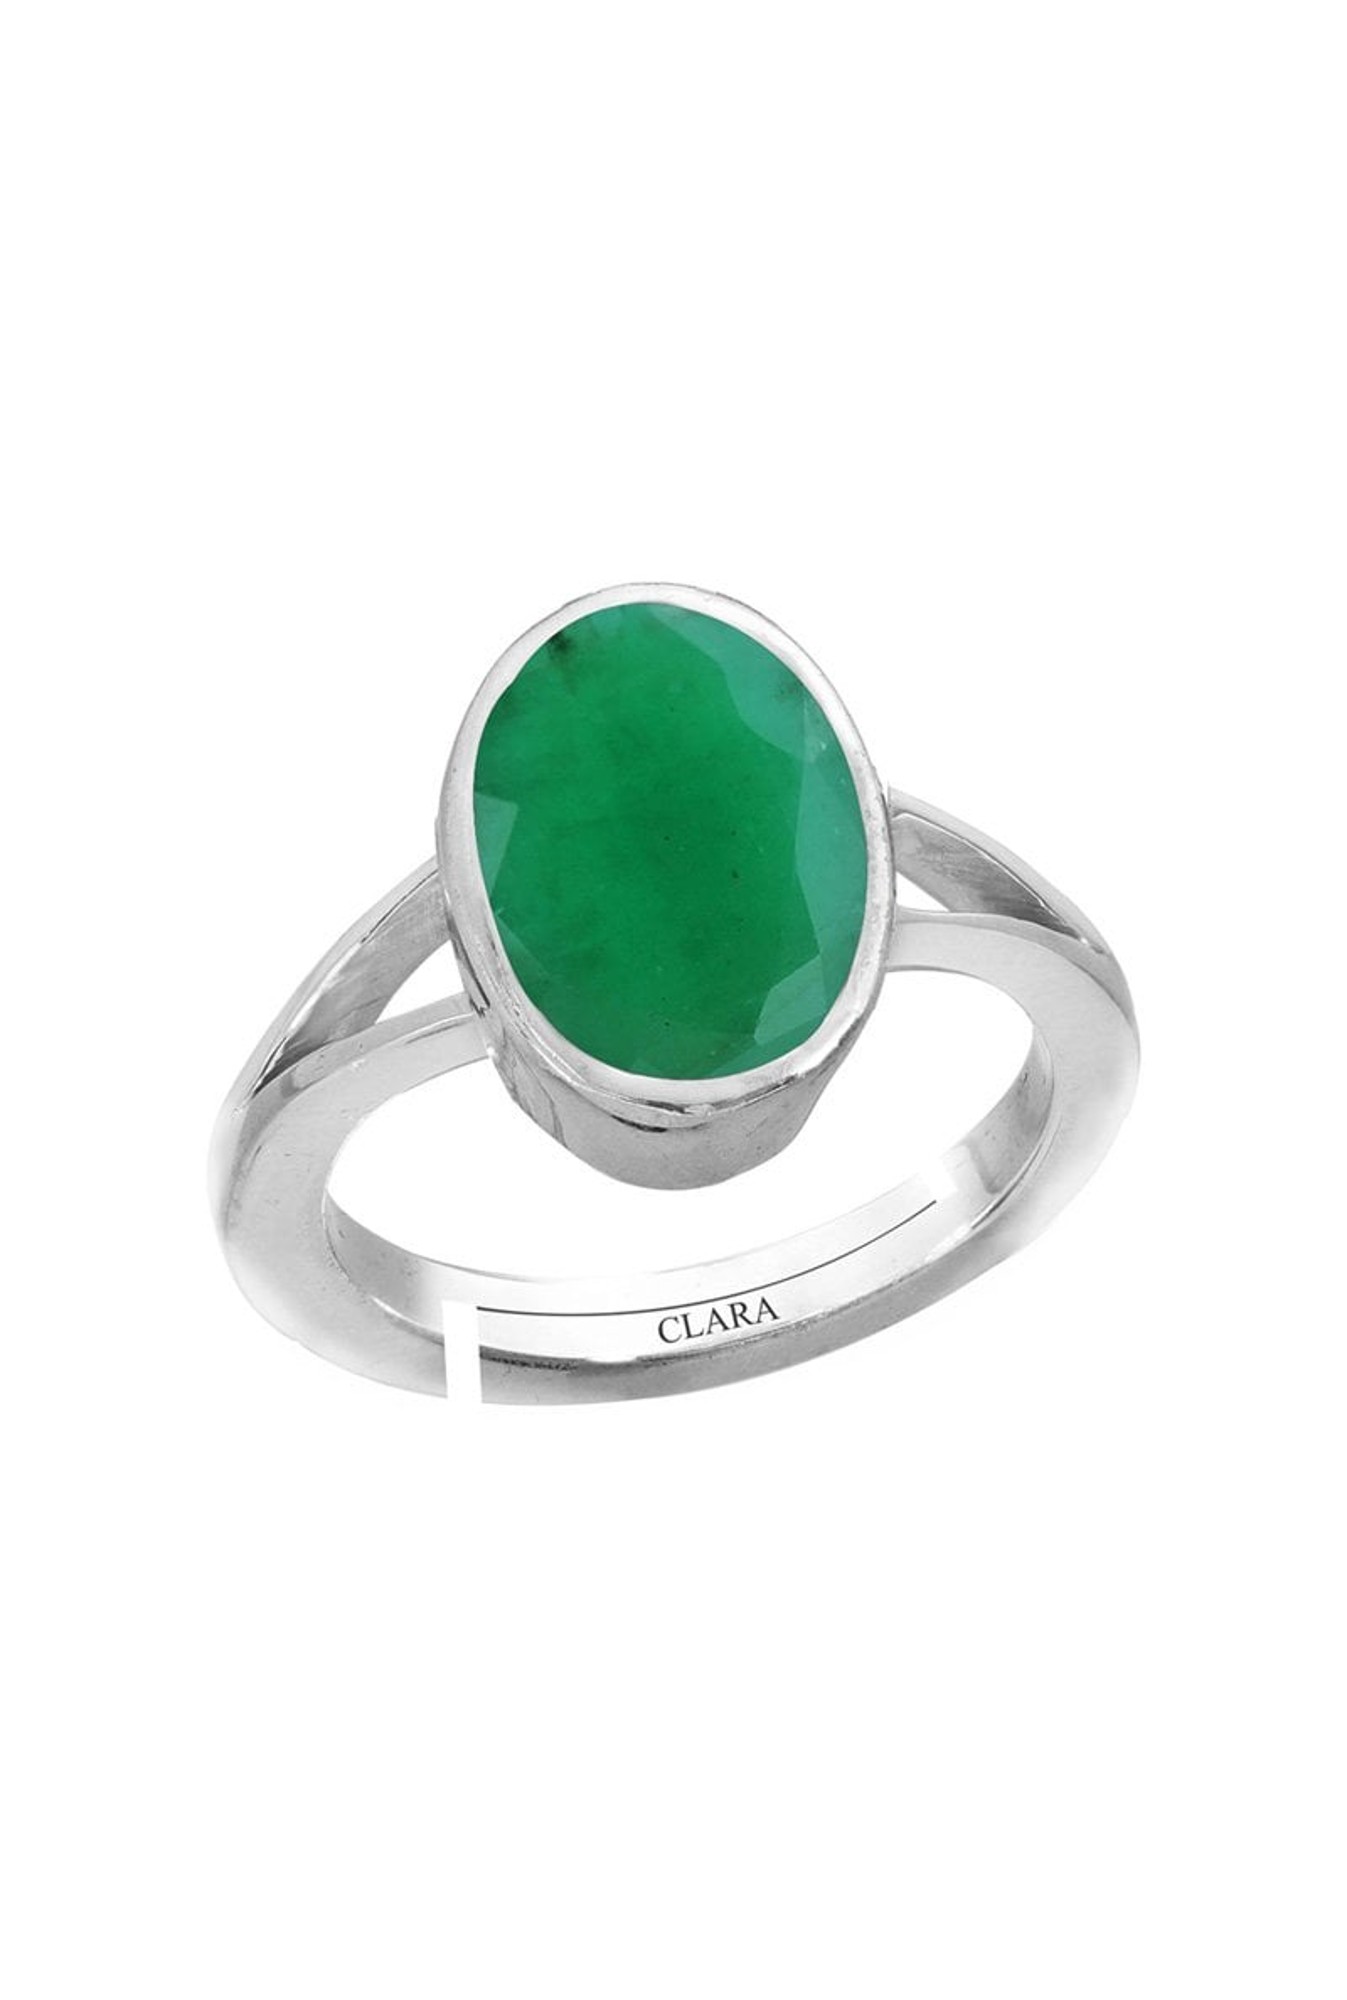 Emerald CZ Halo Ring in 925 Sterling Silver Adjustable Band – VOYLLA